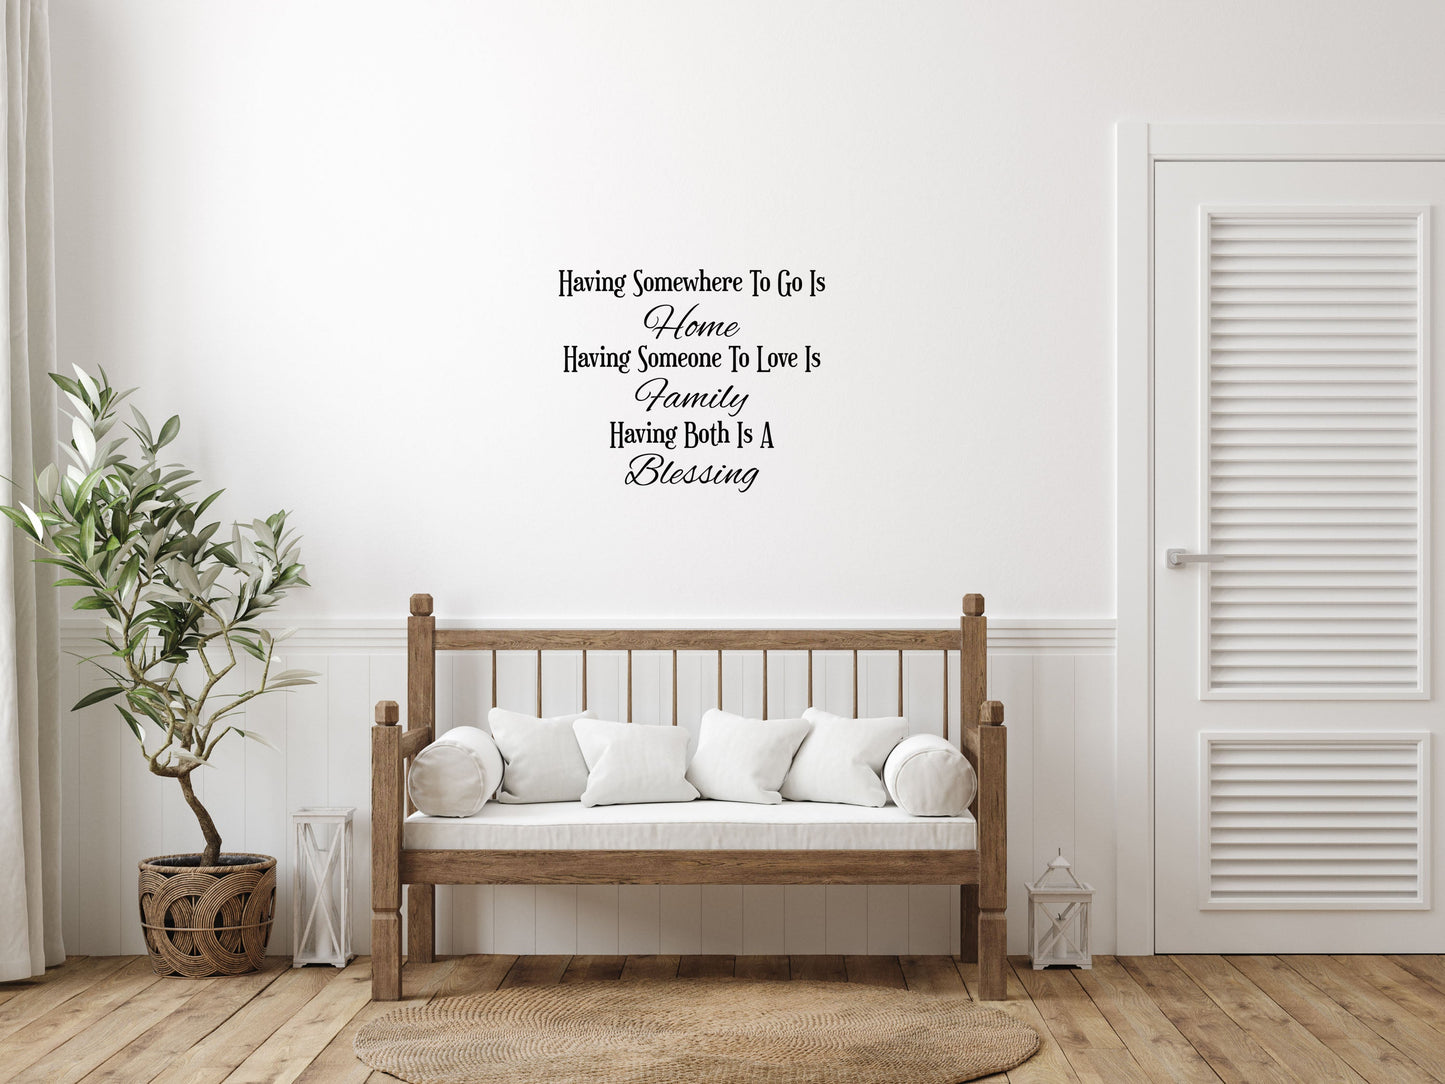 Having Somewhere To Go Decal - Family Home Decor - Blessing Quote - Family Wall Decal - Blessing Wall Art - Blessing Wall Quote Sticker Vinyl Wall Decal Inspirational Wall Signs 